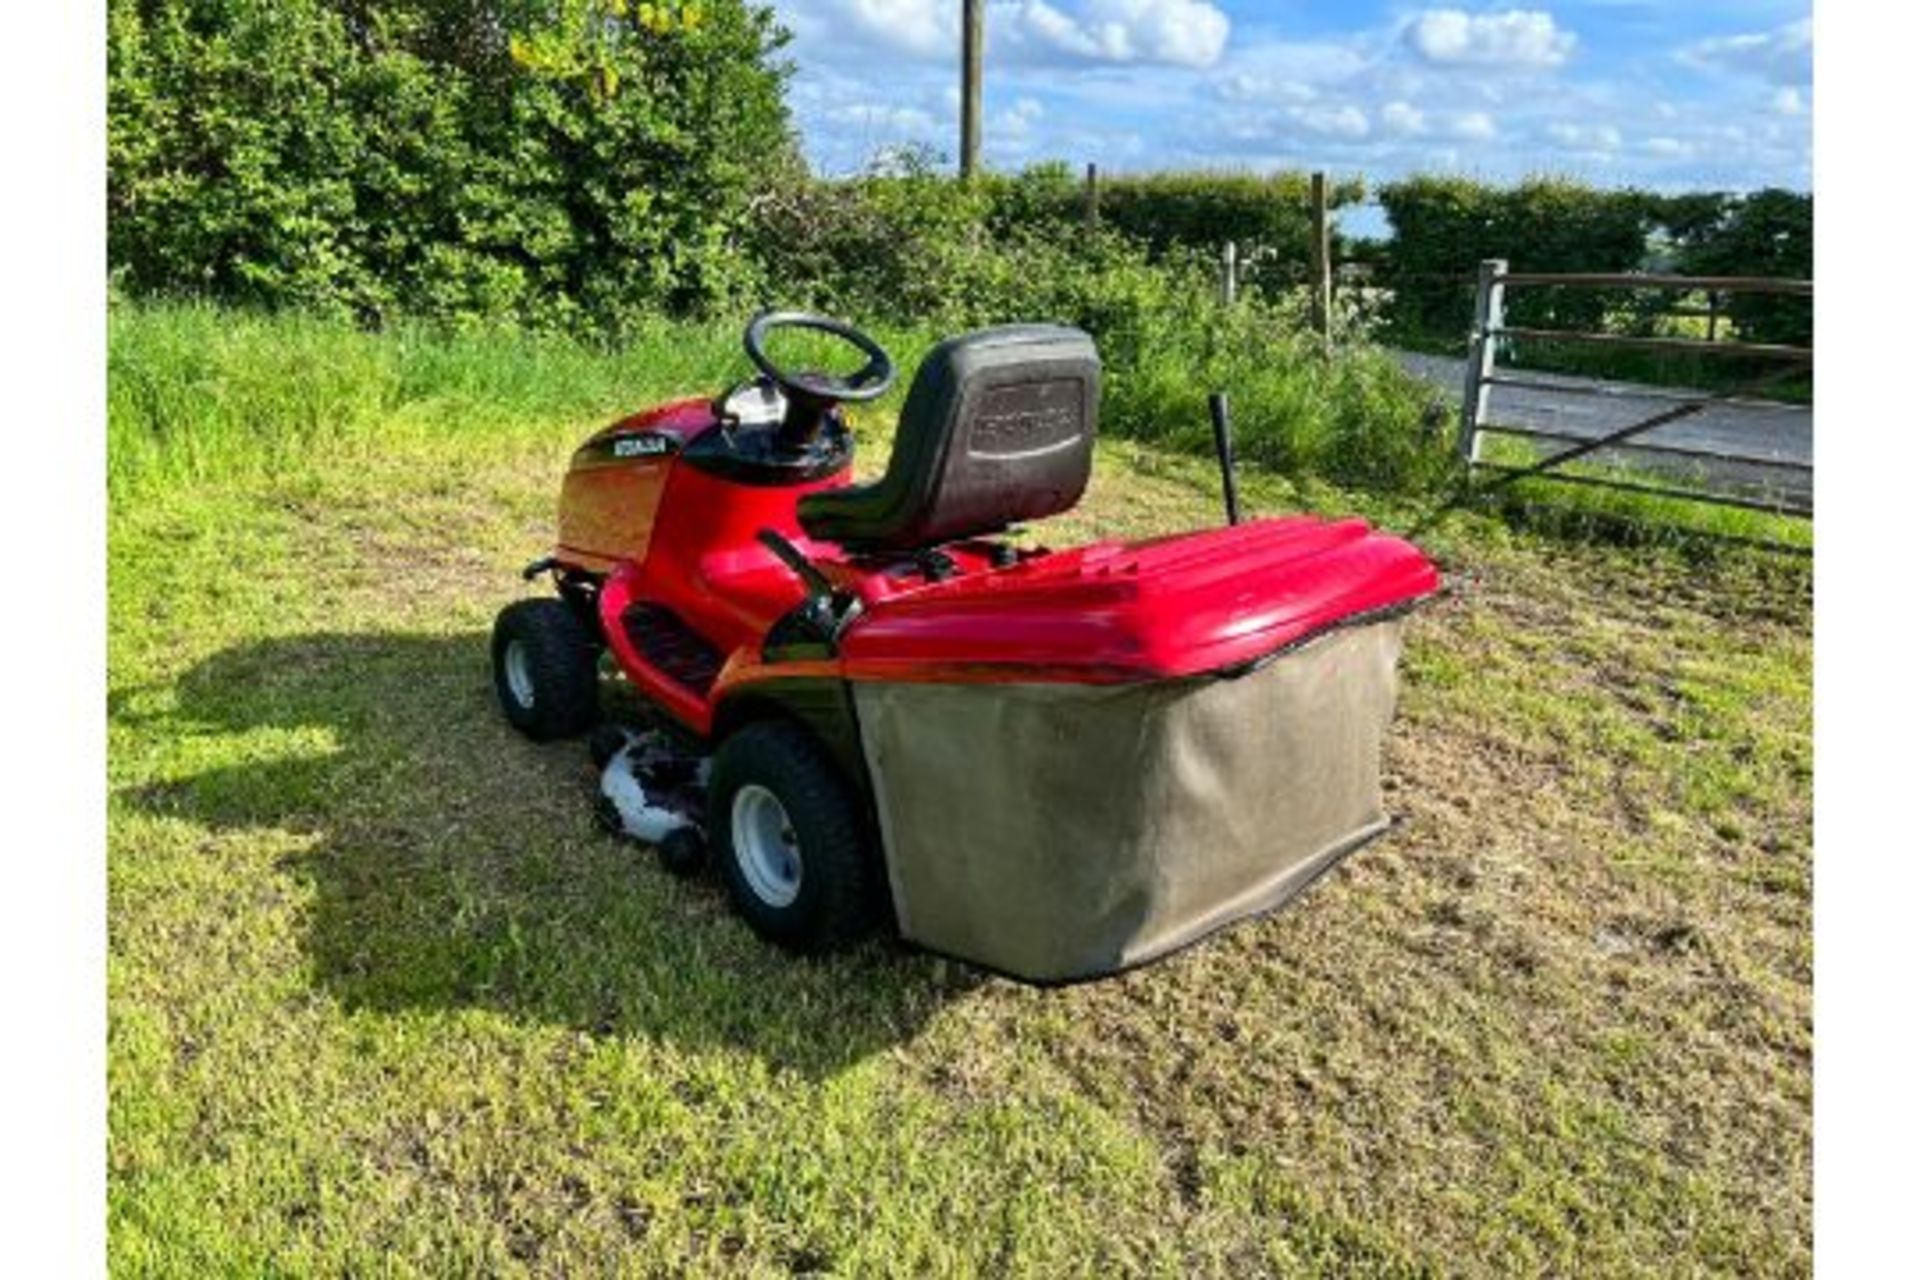 Honda 2417 Ride On Mower With Rear Collector, Runs Drives Cuts And Collects "PLUS VAT" - Image 5 of 22